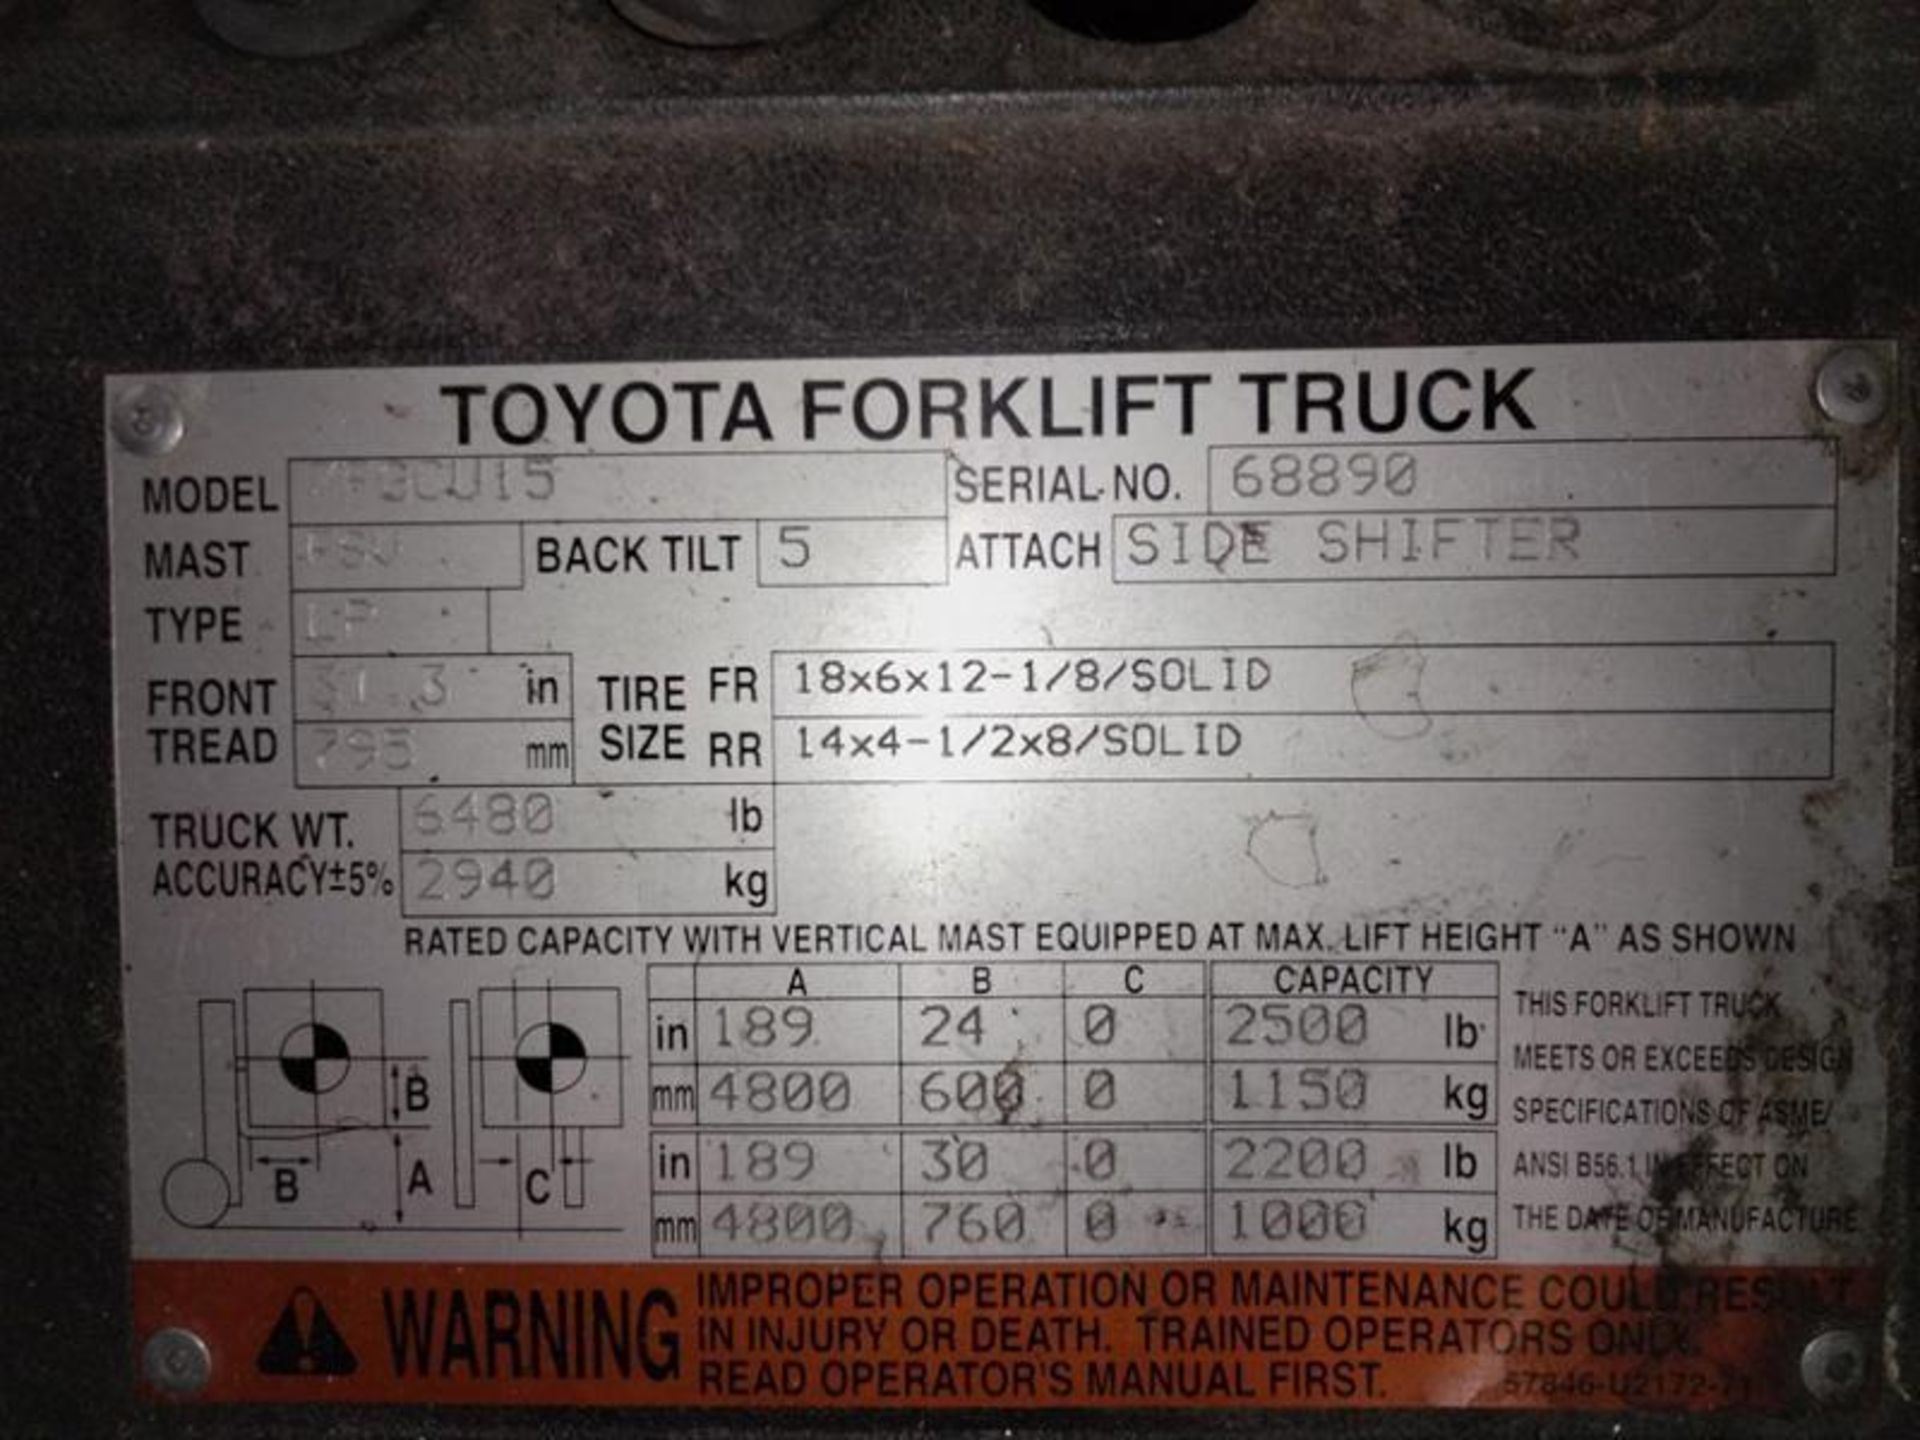 Toyota 7FGCU15 3,000 Lbs. Capacity Forklift With Side - Image 6 of 6